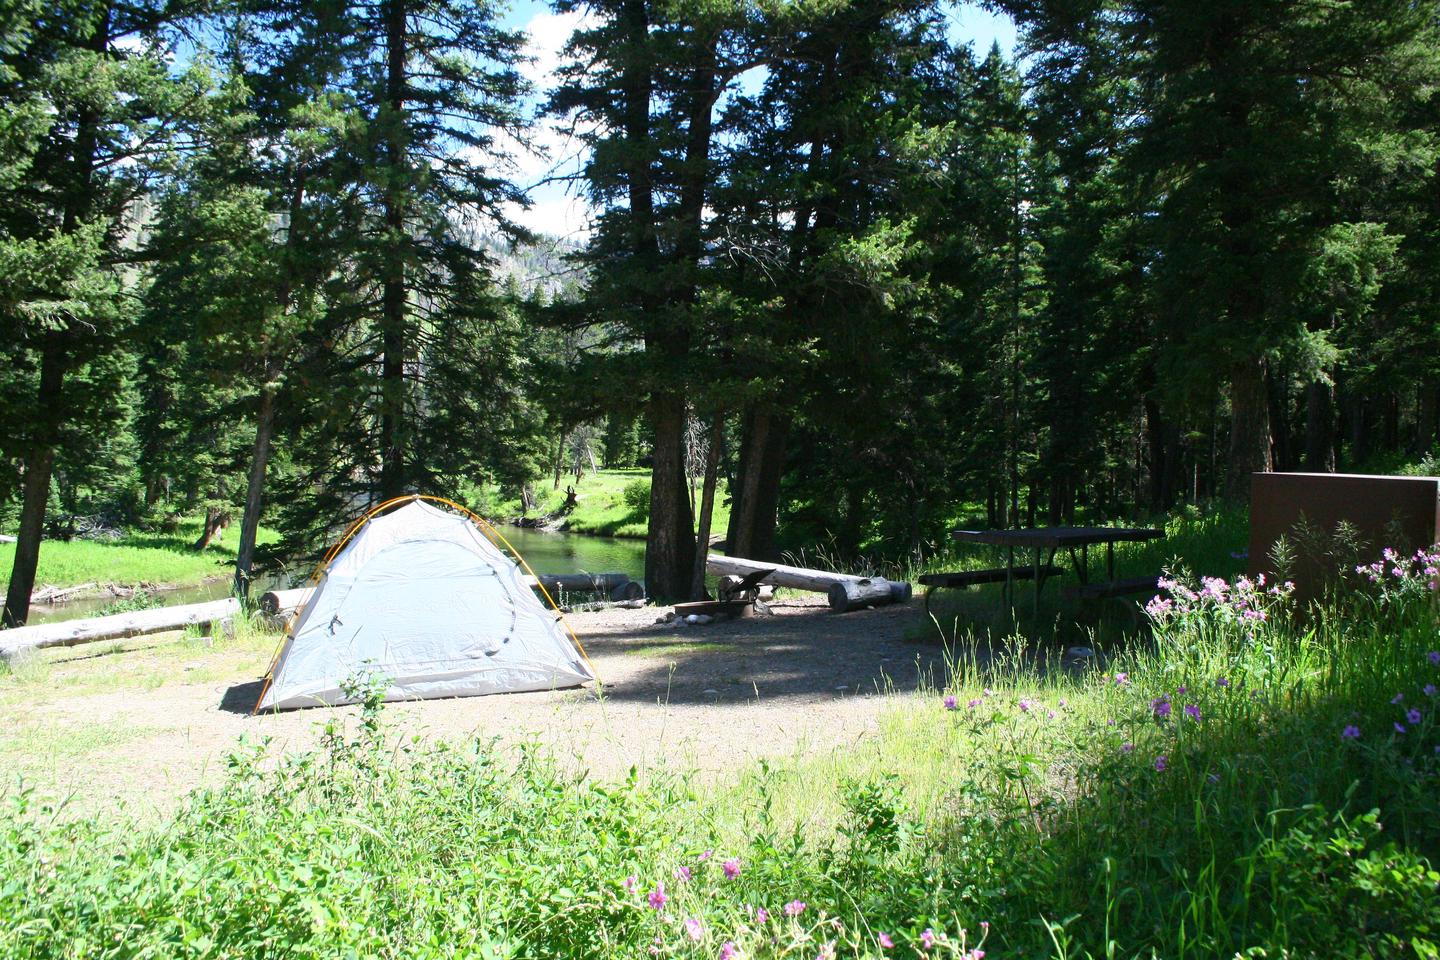 Slough Creek Campground Site #1.....Slough Creek Campground Site #1